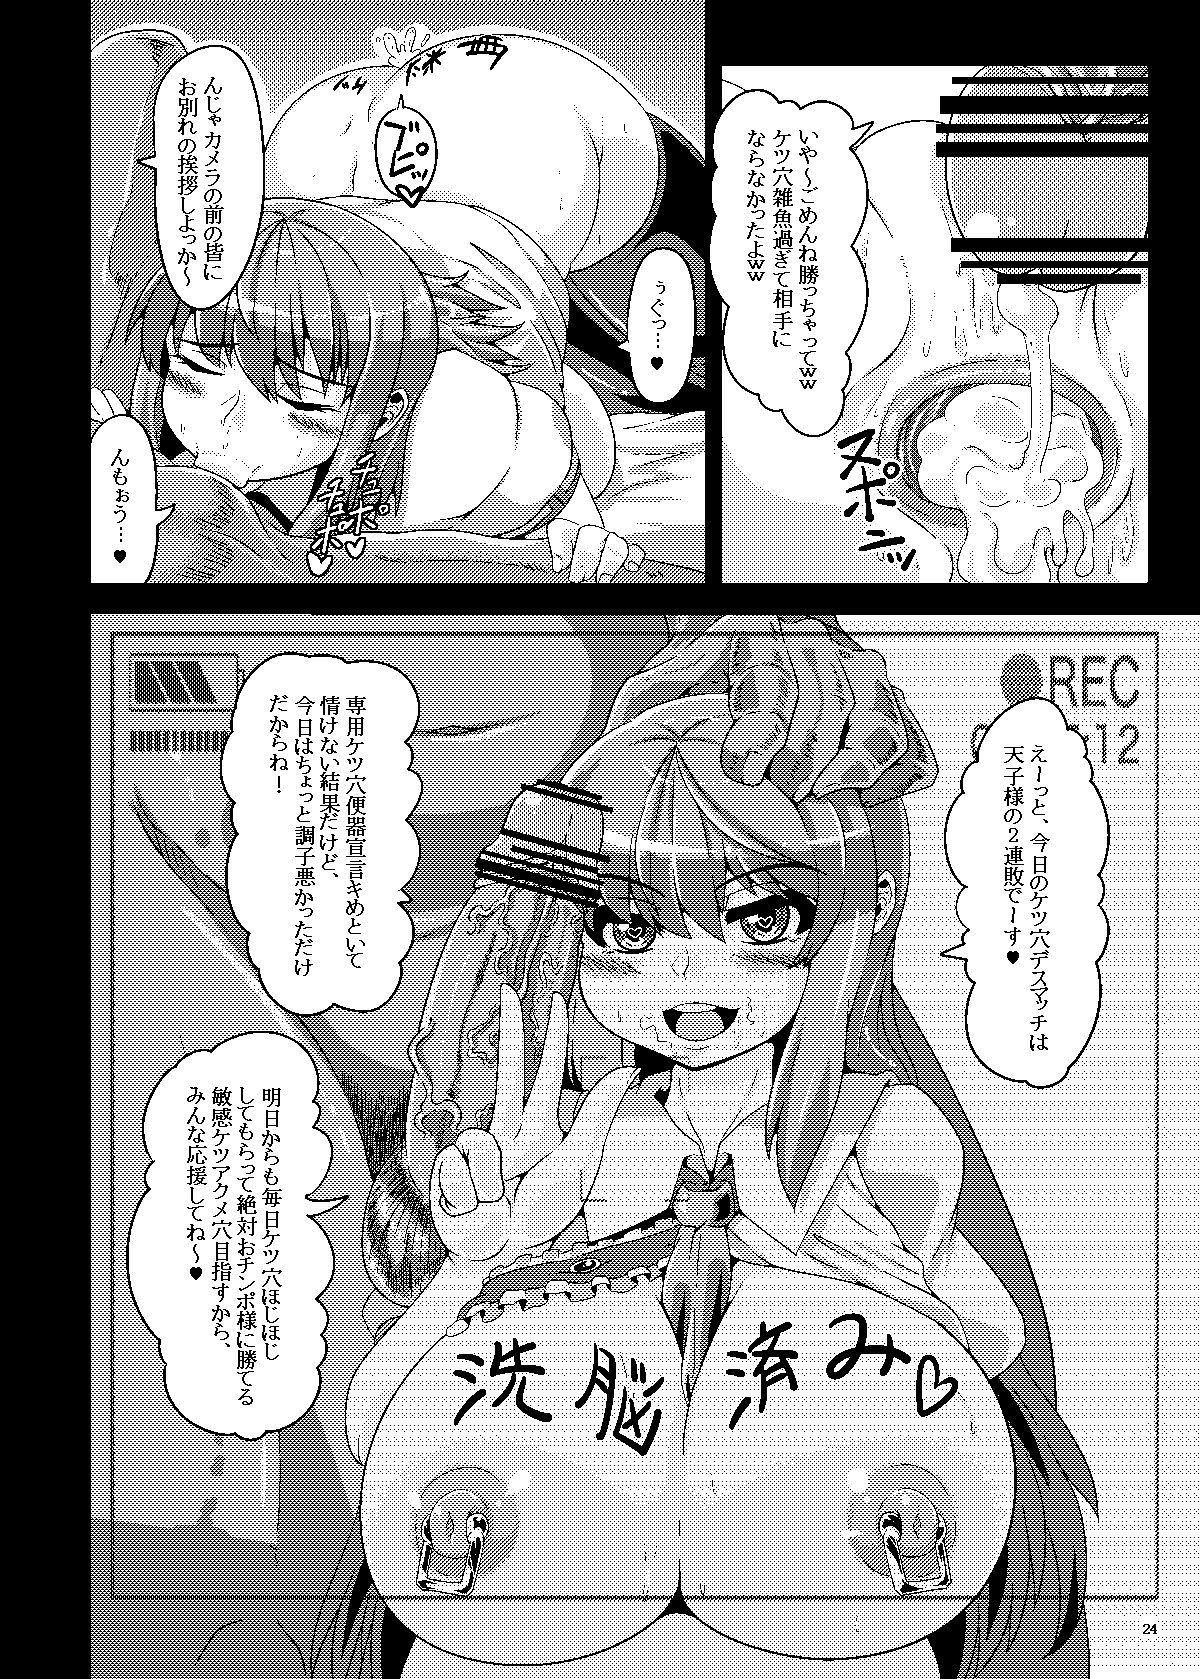 Time 既刊全ページ公開（2017博麗神社例大祭） - Touhou project Hotel - Page 23